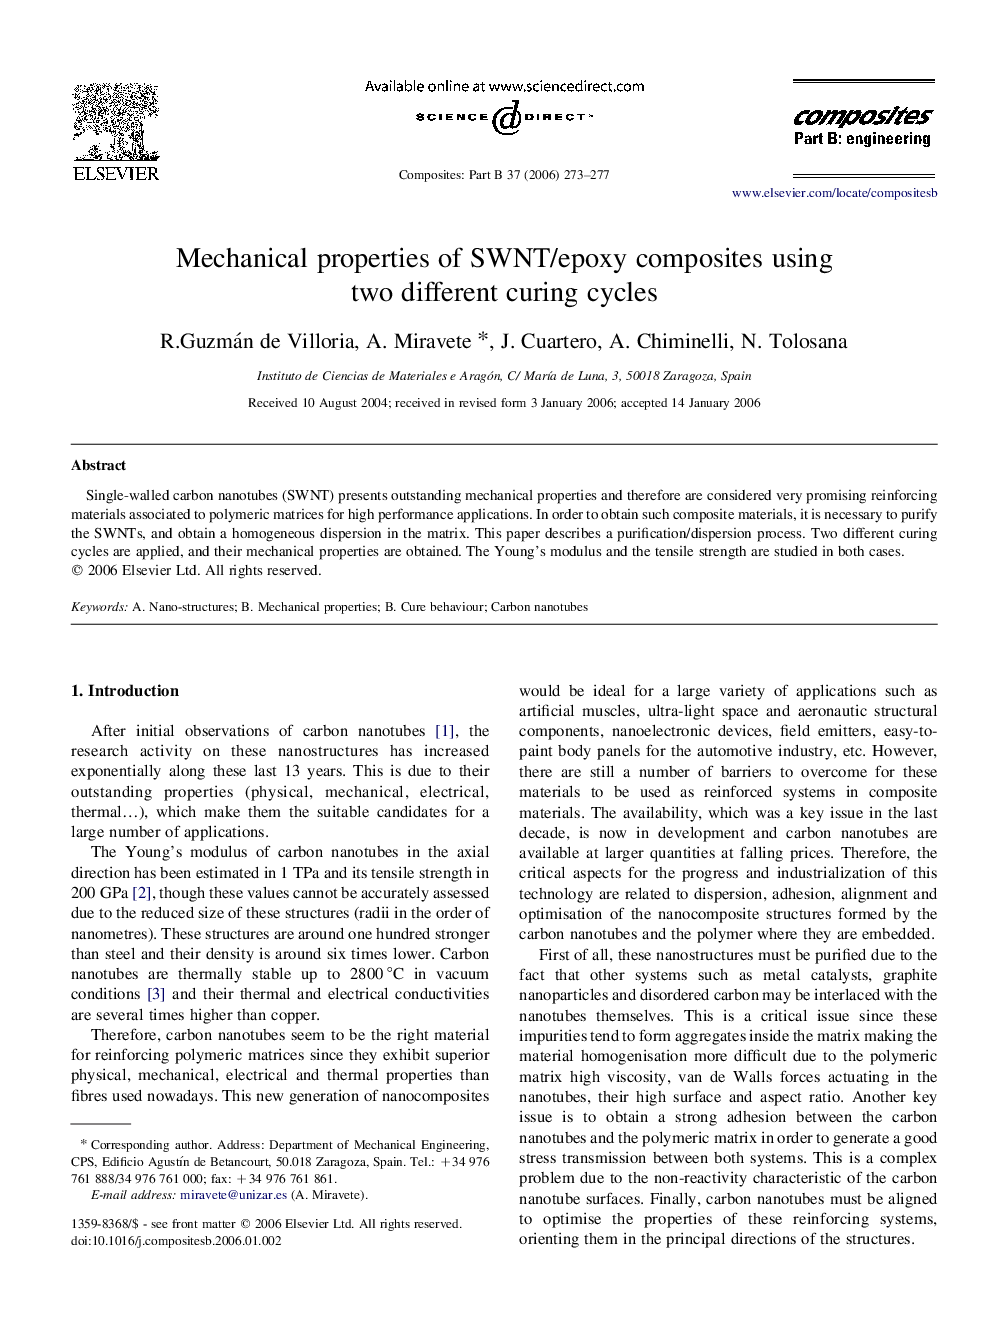 Mechanical properties of SWNT/epoxy composites using two different curing cycles